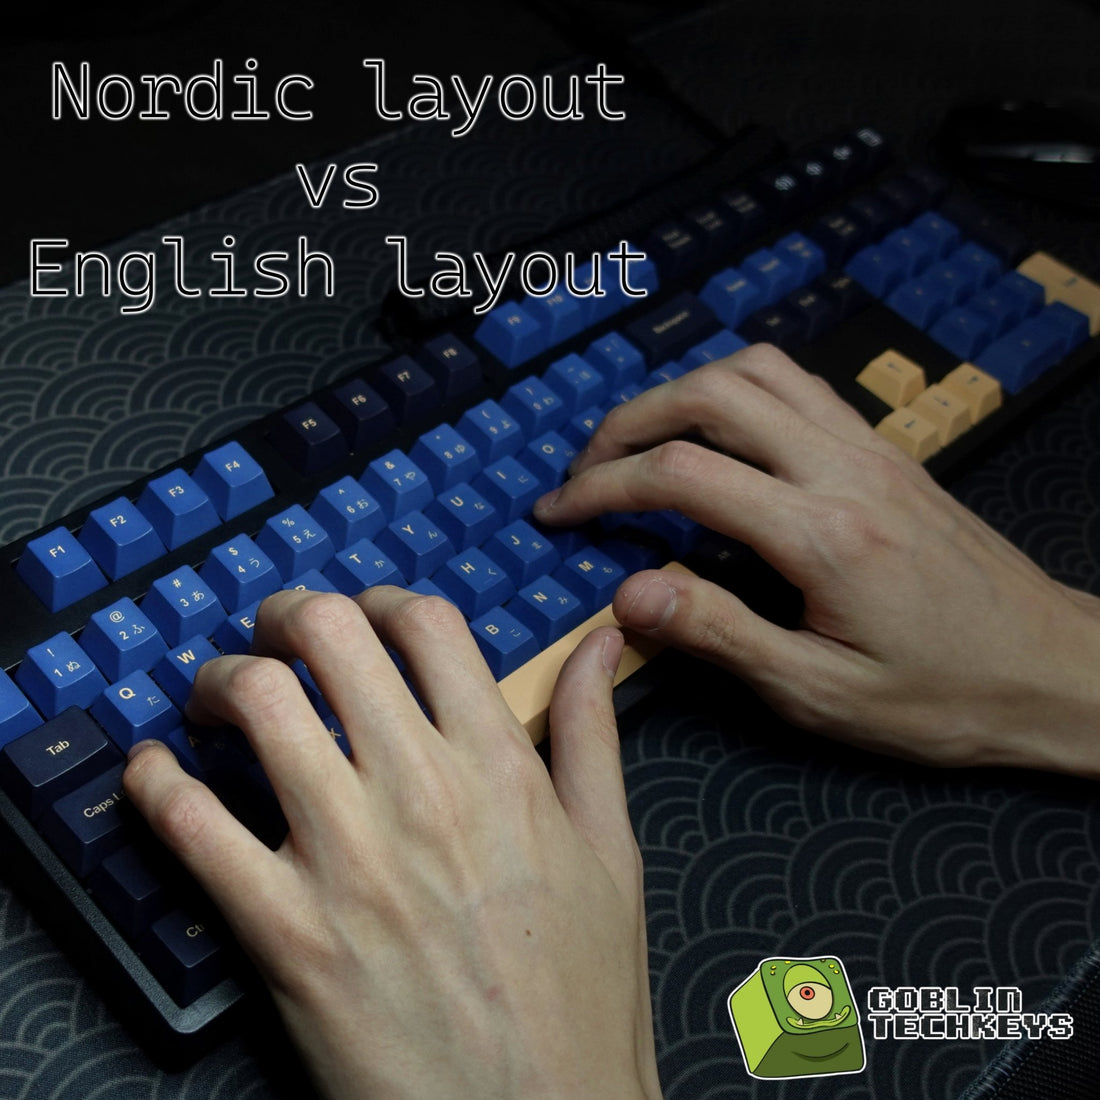 What is the difference between Nordic layout and English layout keyboard? - Goblintechkeys